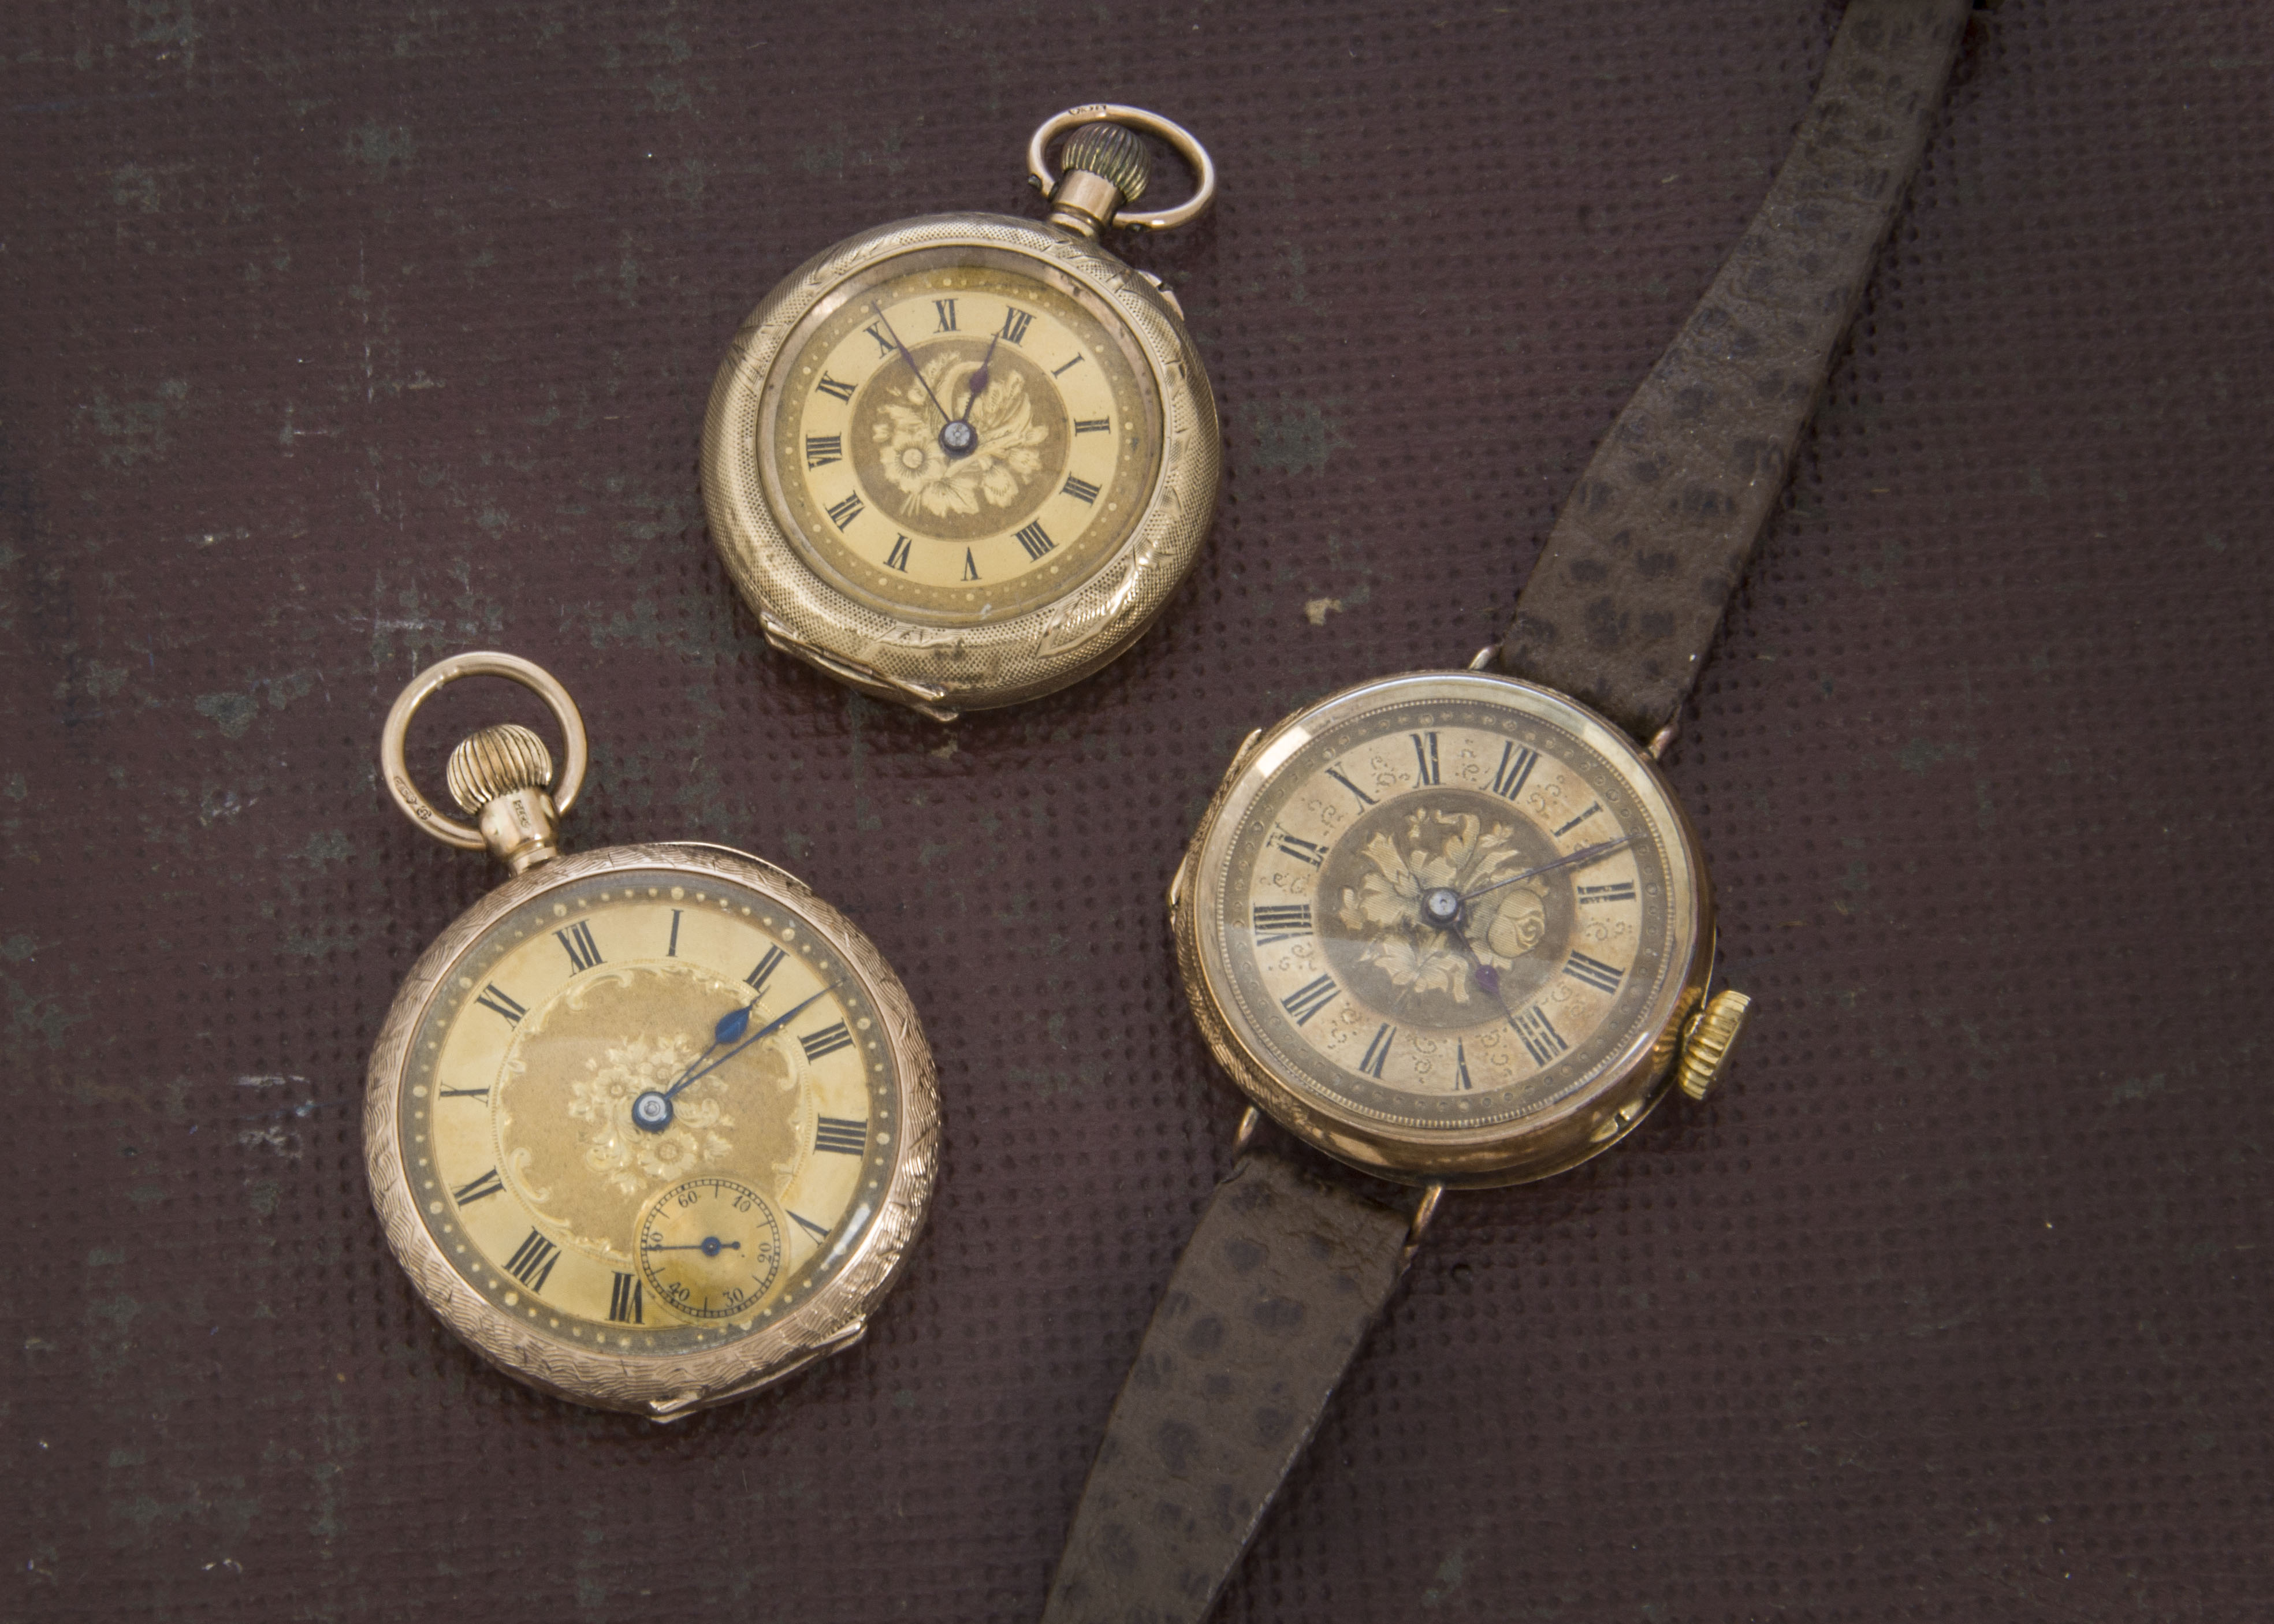 A group of three late 19th and early 20th century gold ladies pocket watches, one marked 14k with